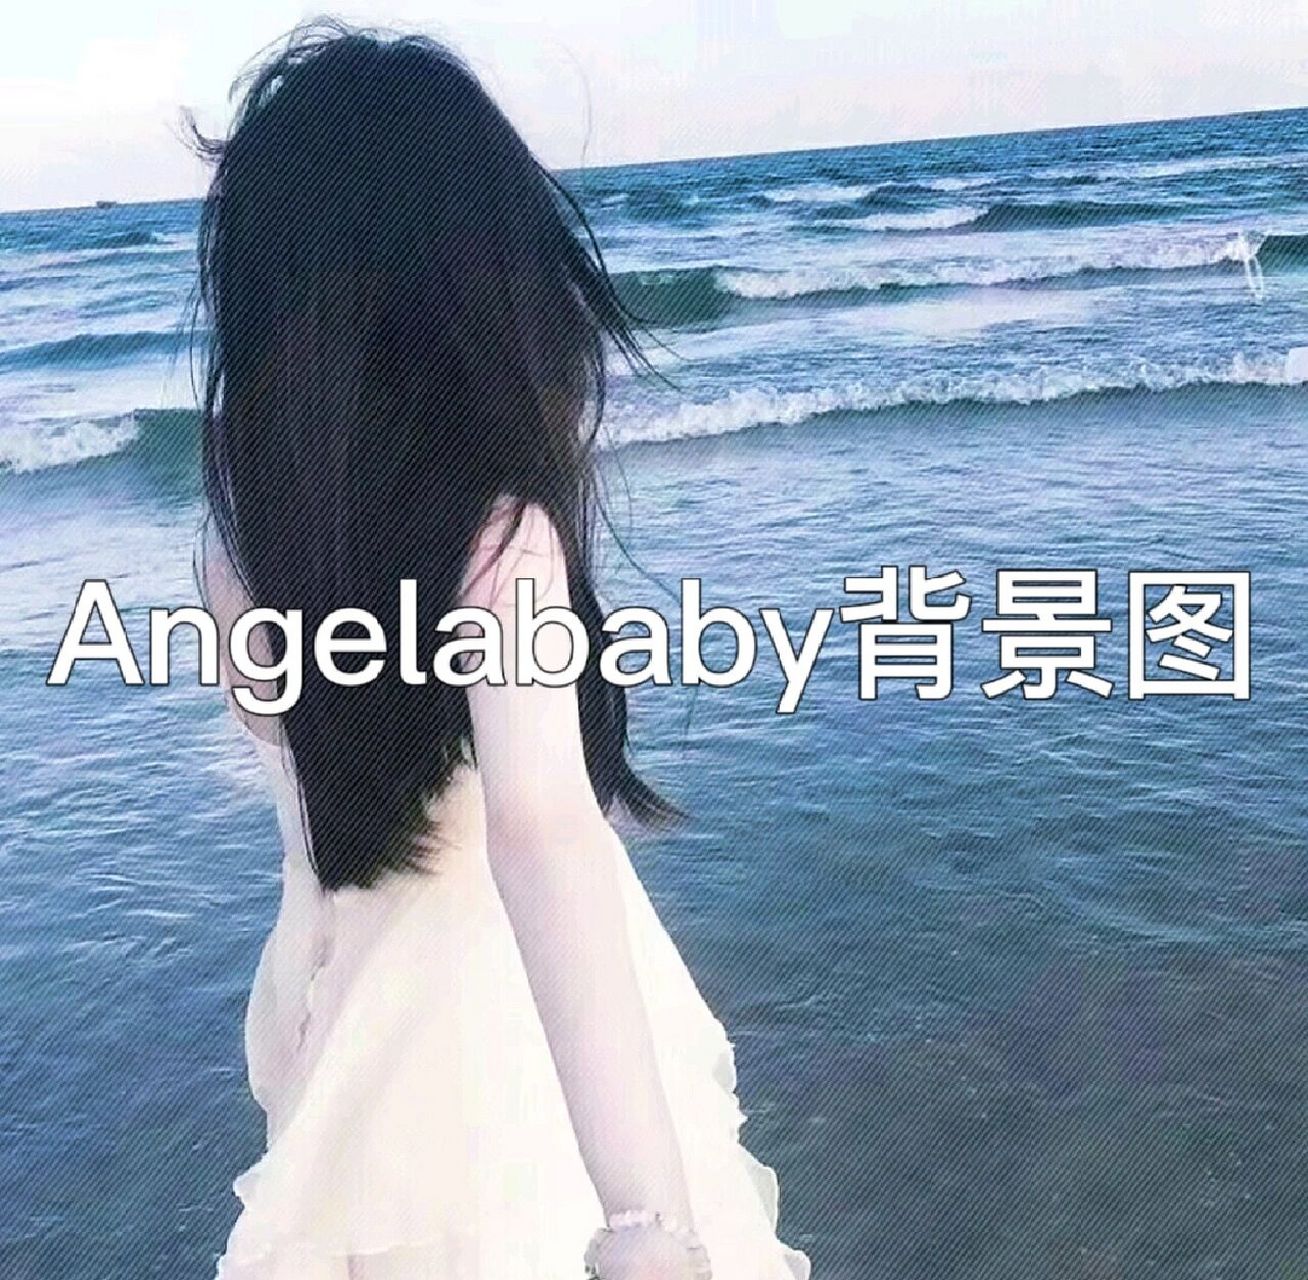 Angelababy文案背景图图片